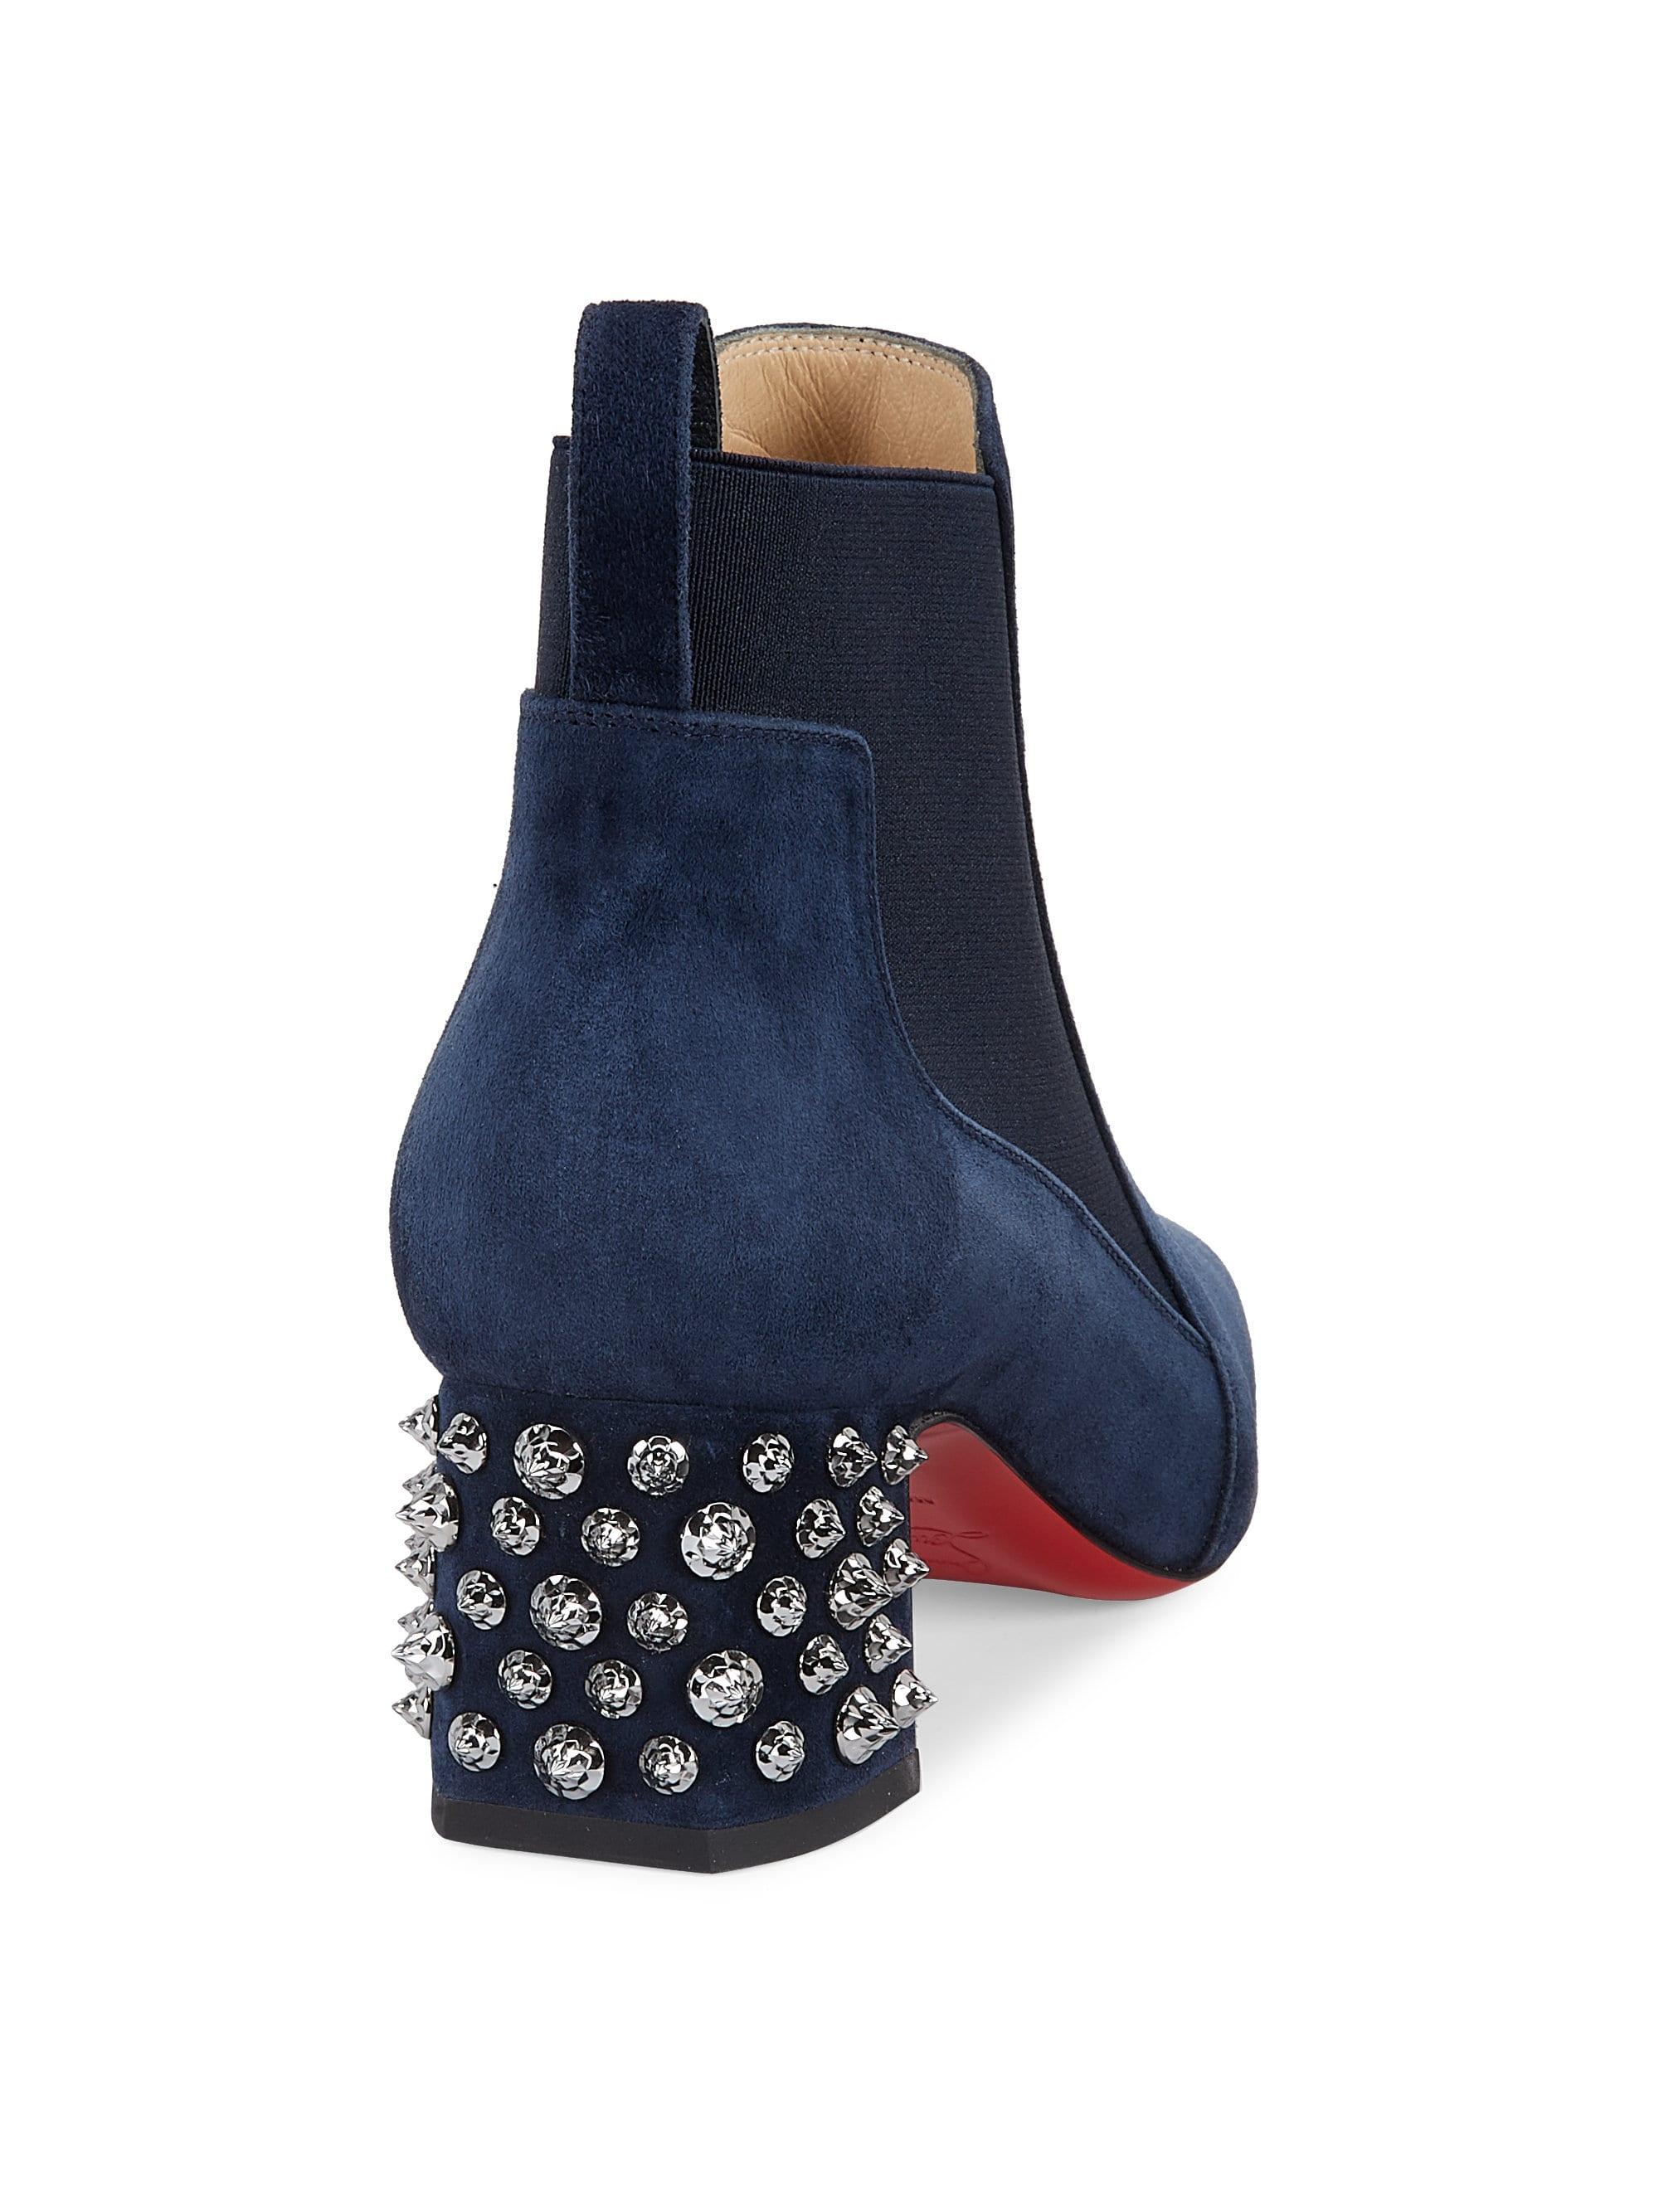 studded suede chelsea boots